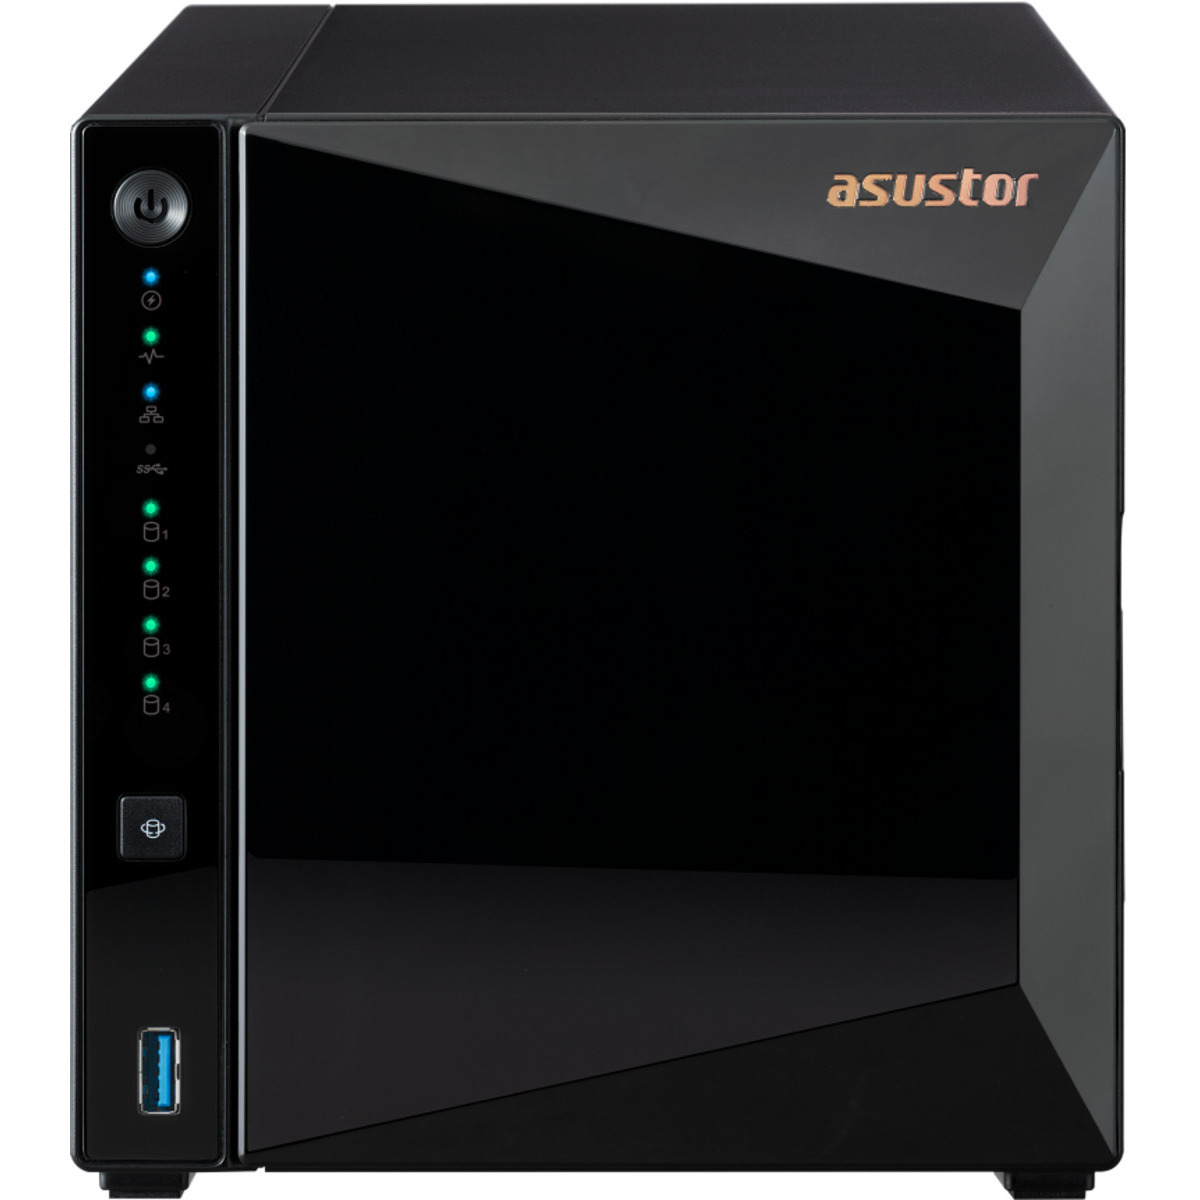 ASUSTOR DRIVESTOR 4 Pro Gen2 AS3304T v2 40tb 4-Bay Desktop Personal / Basic Home / Small Office NAS - Network Attached Storage Device 4x10tb Seagate EXOS X18 ST10000NM018G 3.5 7200rpm SATA 6Gb/s HDD ENTERPRISE Class Drives Installed - Burn-In Tested - ON SALE DRIVESTOR 4 Pro Gen2 AS3304T v2